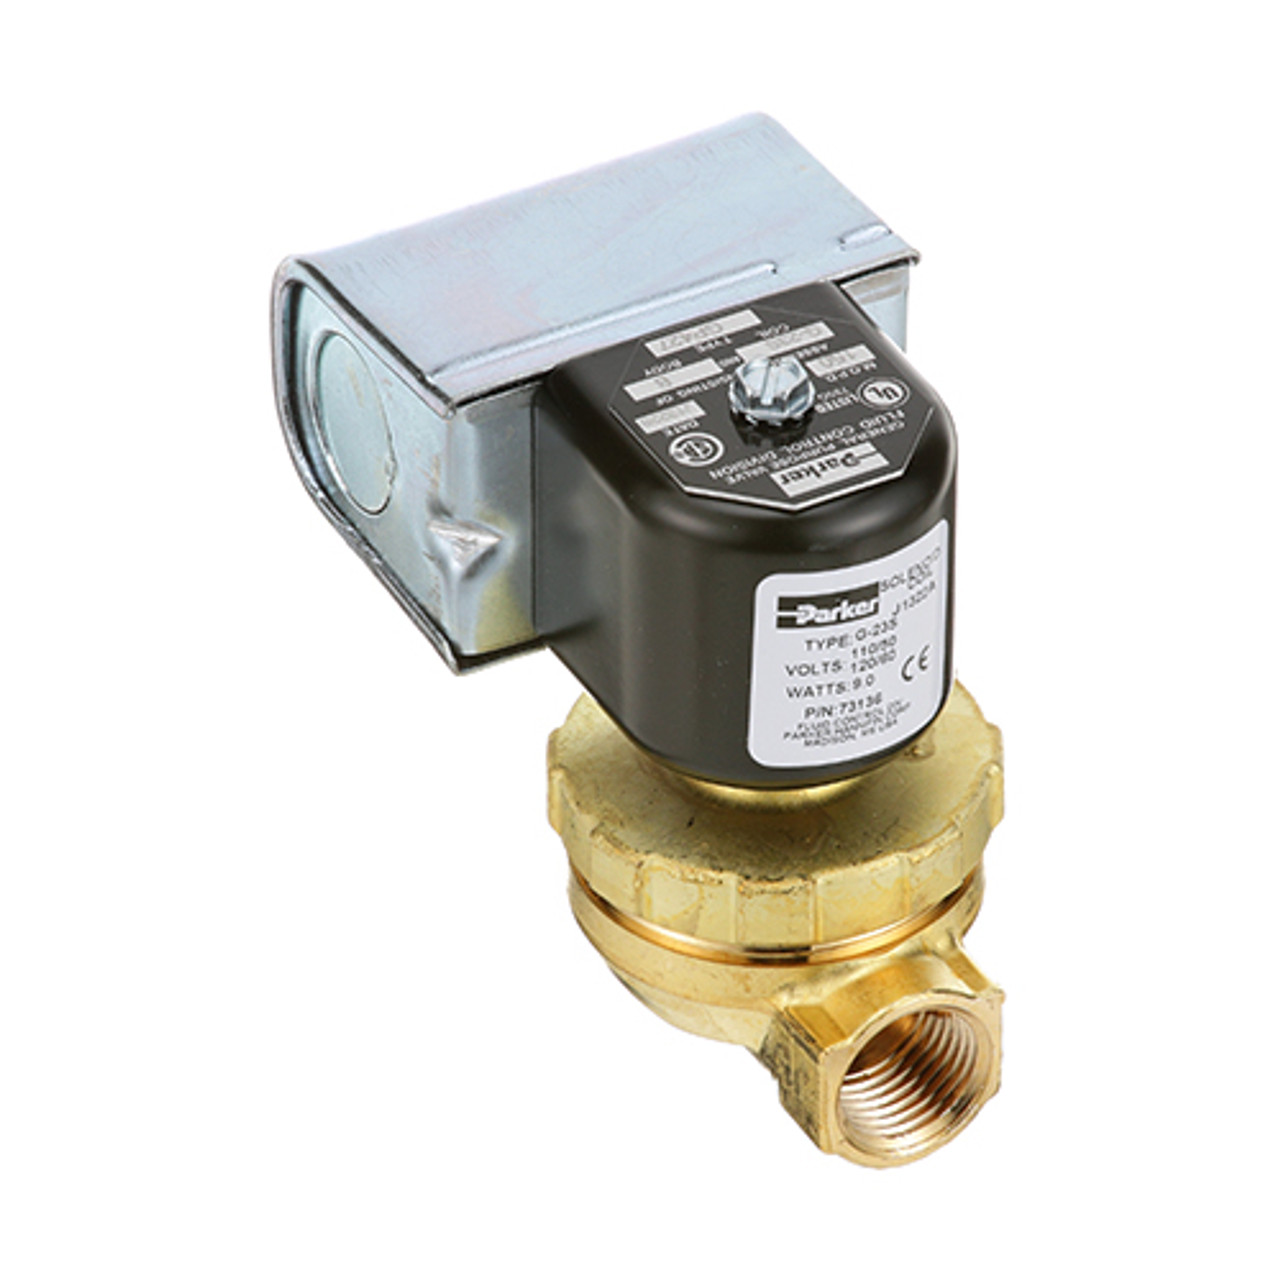 1/2 Solenoid Valve - Replacement Part For Hobart 435968-1